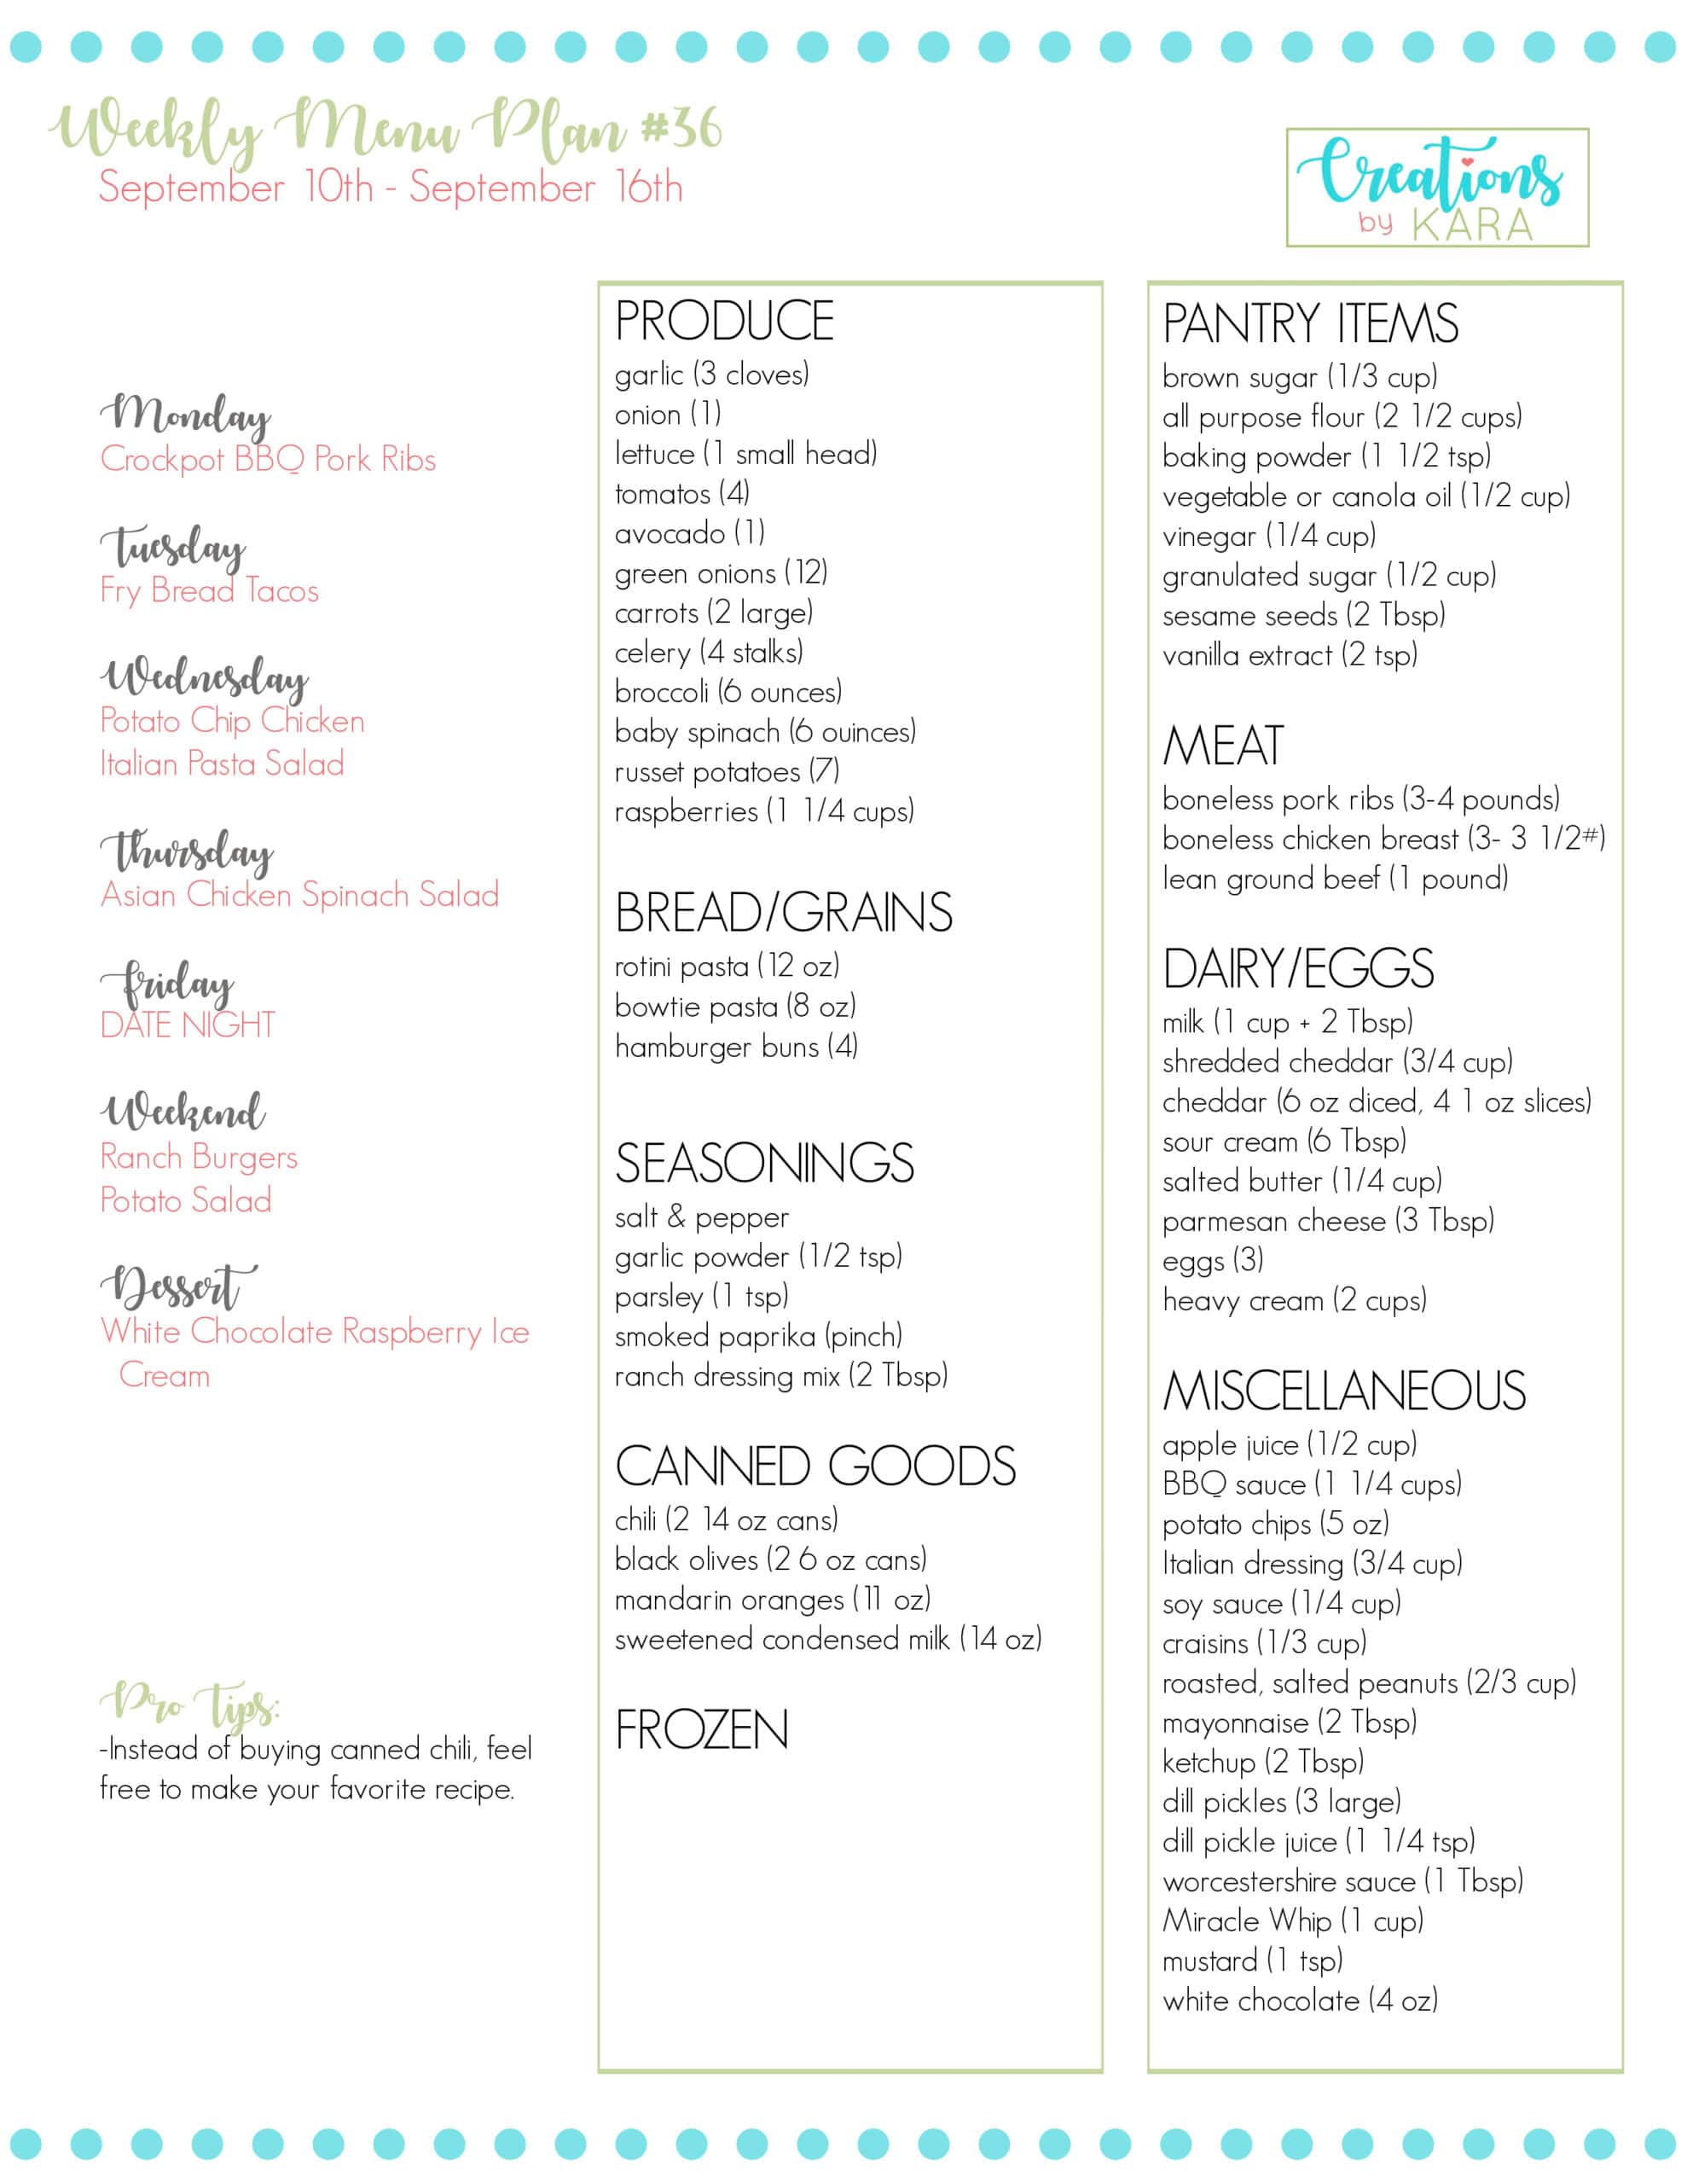 printable grocery list for weekly meal plan #36